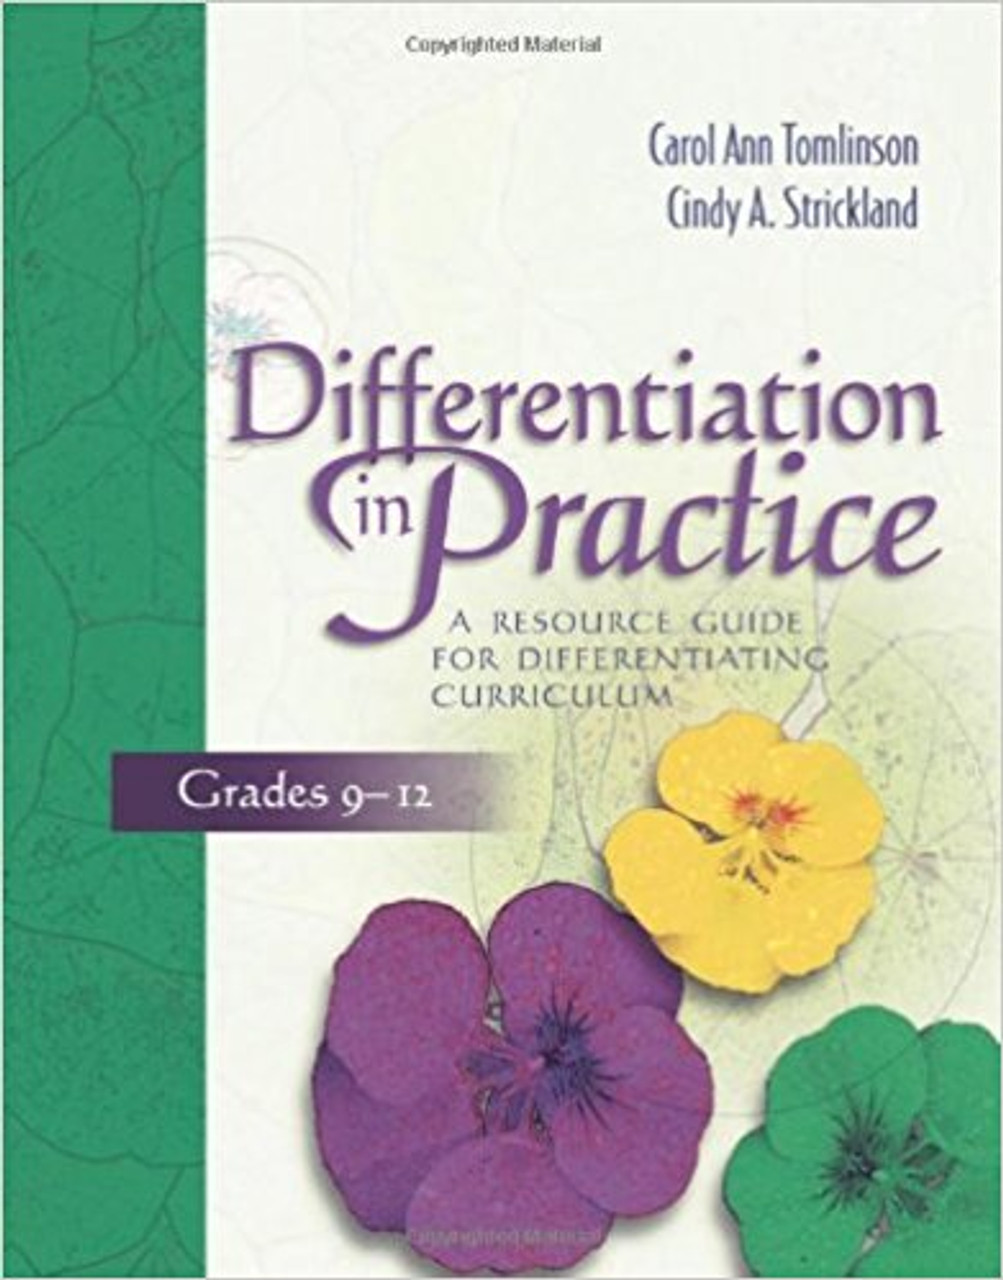 Differentiation in Practice, Grades 9-12: A Resource Guide for Differentiating Curriculum